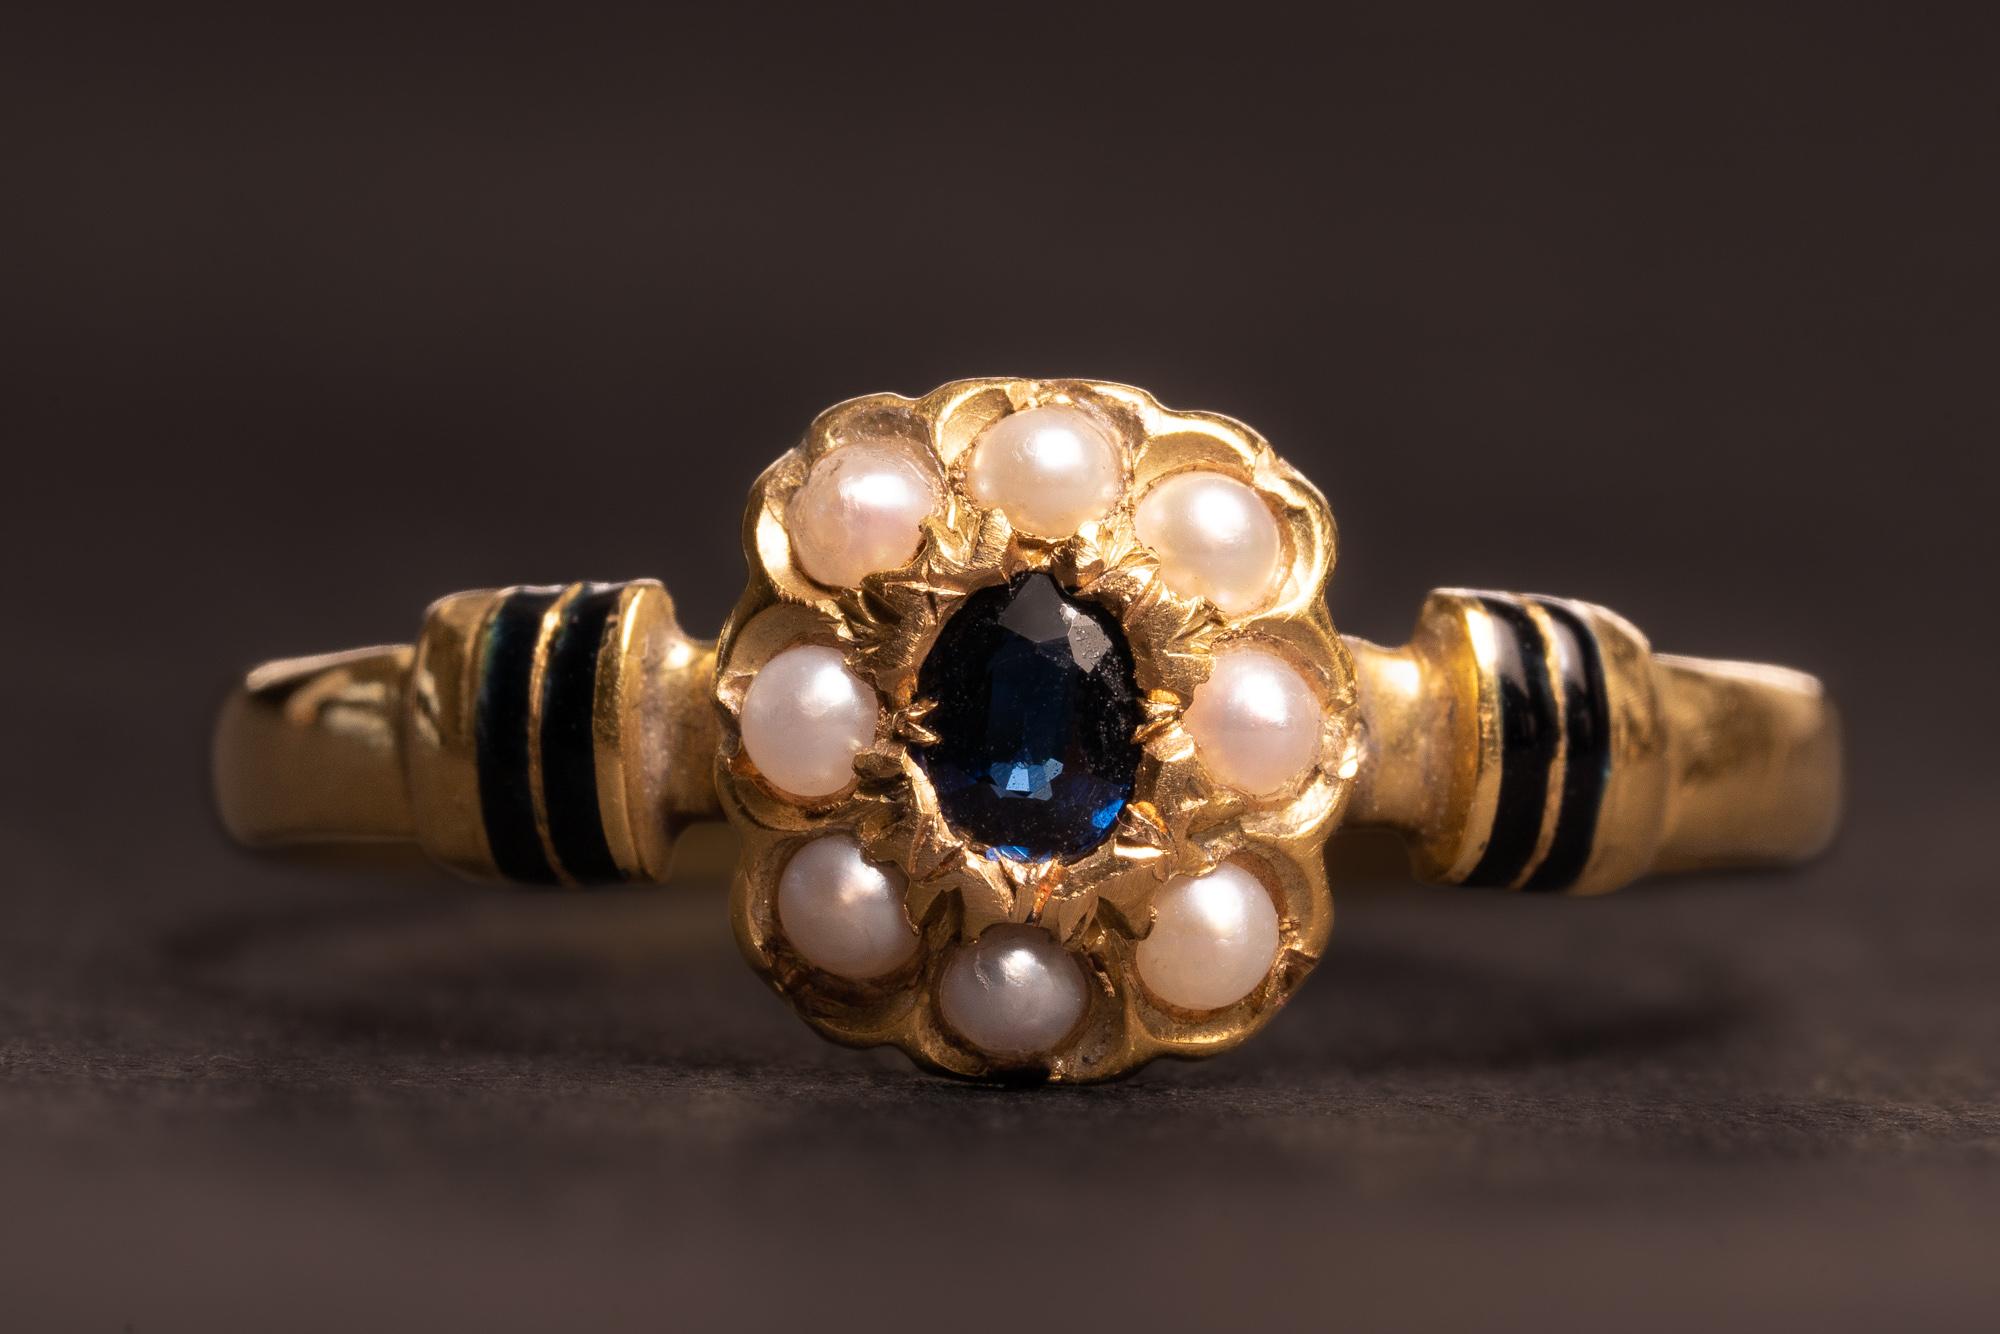 Such a striking and feminine sapphire gold ring! This marvelous antique Victorian ring is made of solid 18 ct yellow gold and is a true eye-catcher! 

Classy, timeless and unique, this ring boasts a beautiful floral crown. It carries a lovely